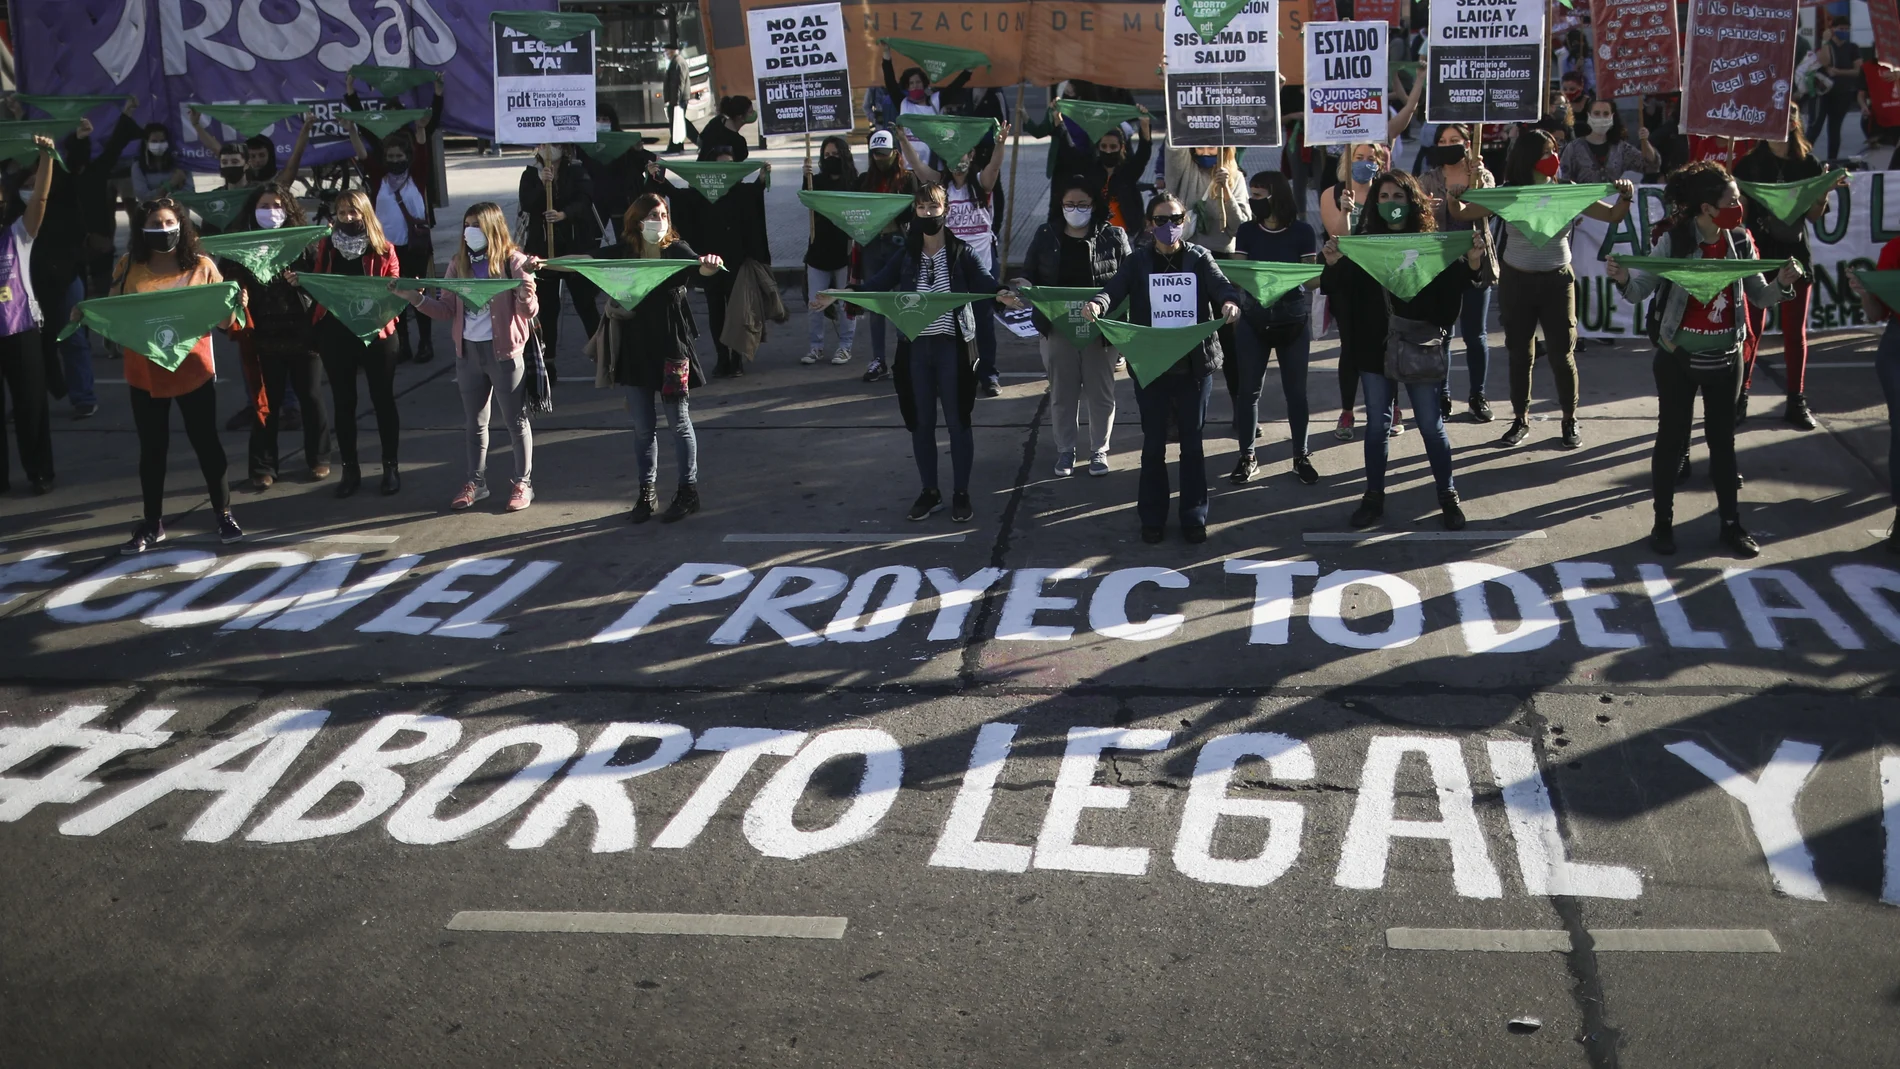 Pro-choice activists hold the iconic green handkerchiefs in favor of decriminalizing abortion as they protest outside Congress during a government-ordered lockdown to curb the spread of the coronavirus in Buenos Aires, Argentina, Thursday, May 28, 2020. (AP Photo/Natacha Pisarenko)